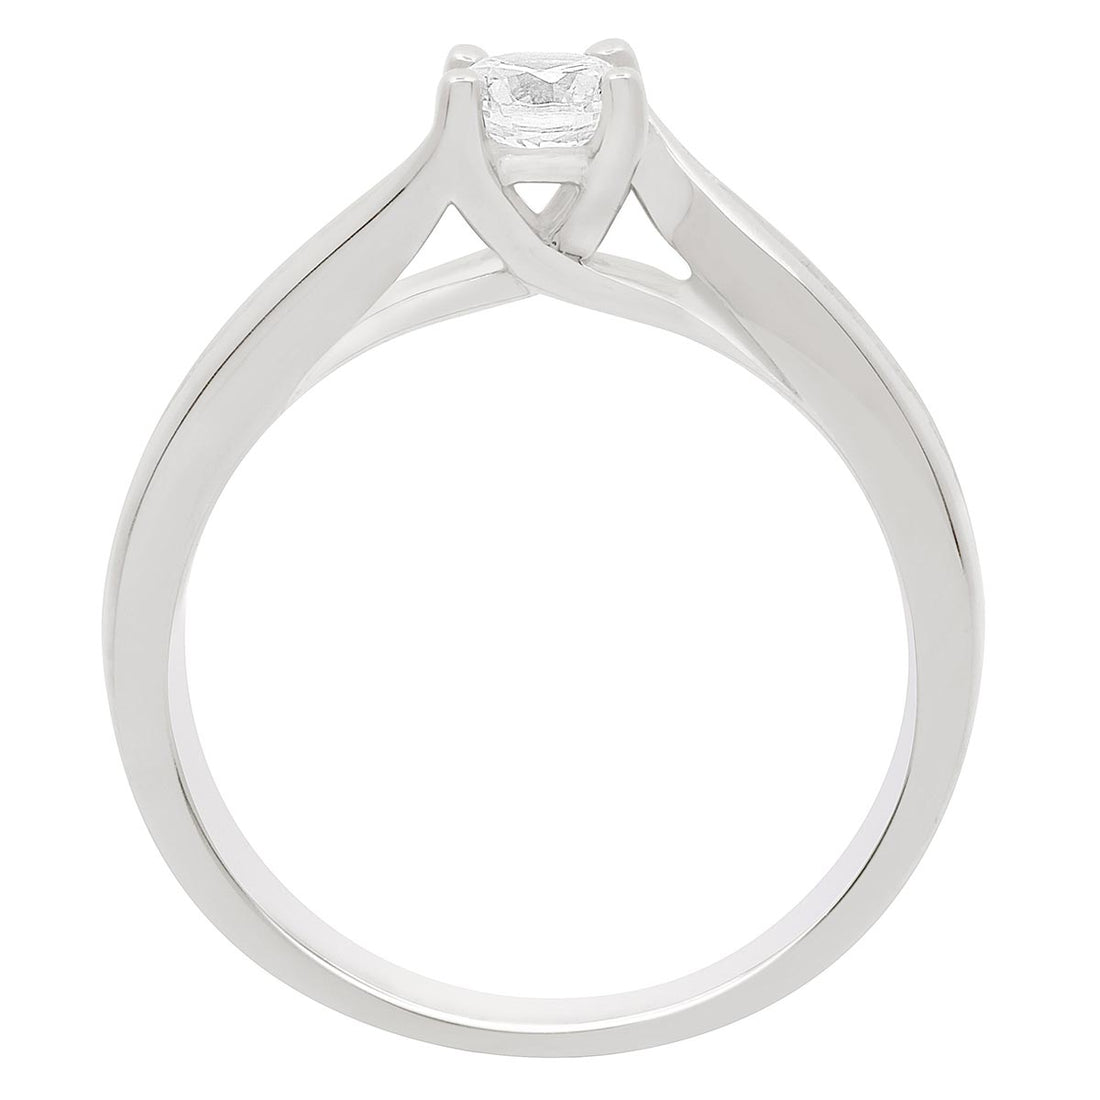 Crossover Band Diamond Ring made from platinum standing upright